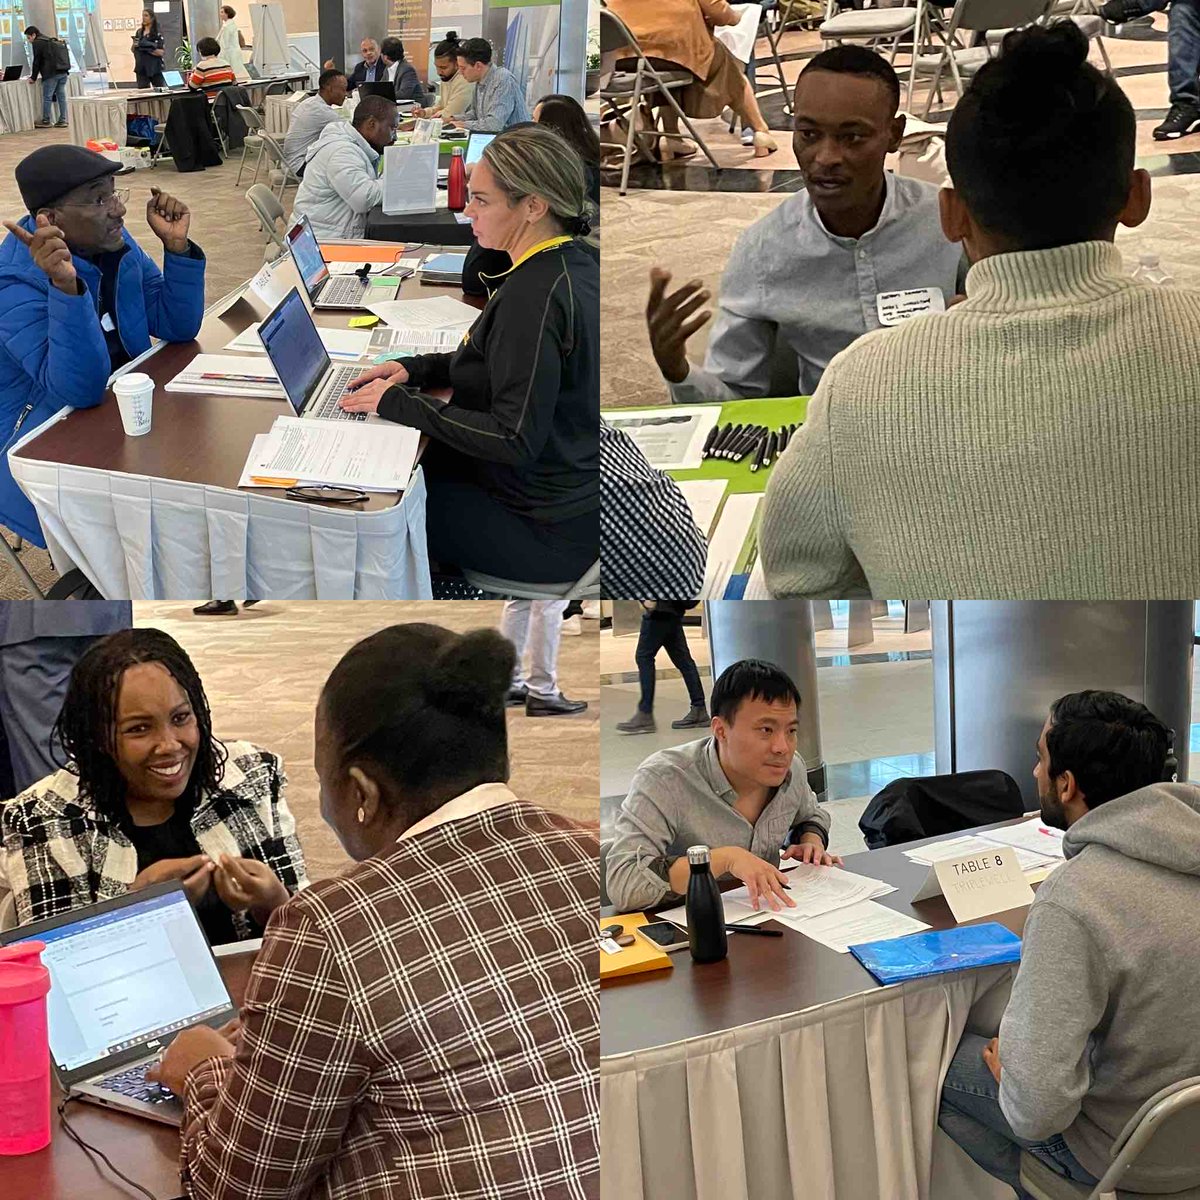 At today’s Toronto Refugee Hiring event, forcibly displaced persons get the chance to interview directly with Canadian employers. 

Diverse people with diverse skills are a huge asset to employers; many job offers will be given on the spot! #WelcomingEconomy